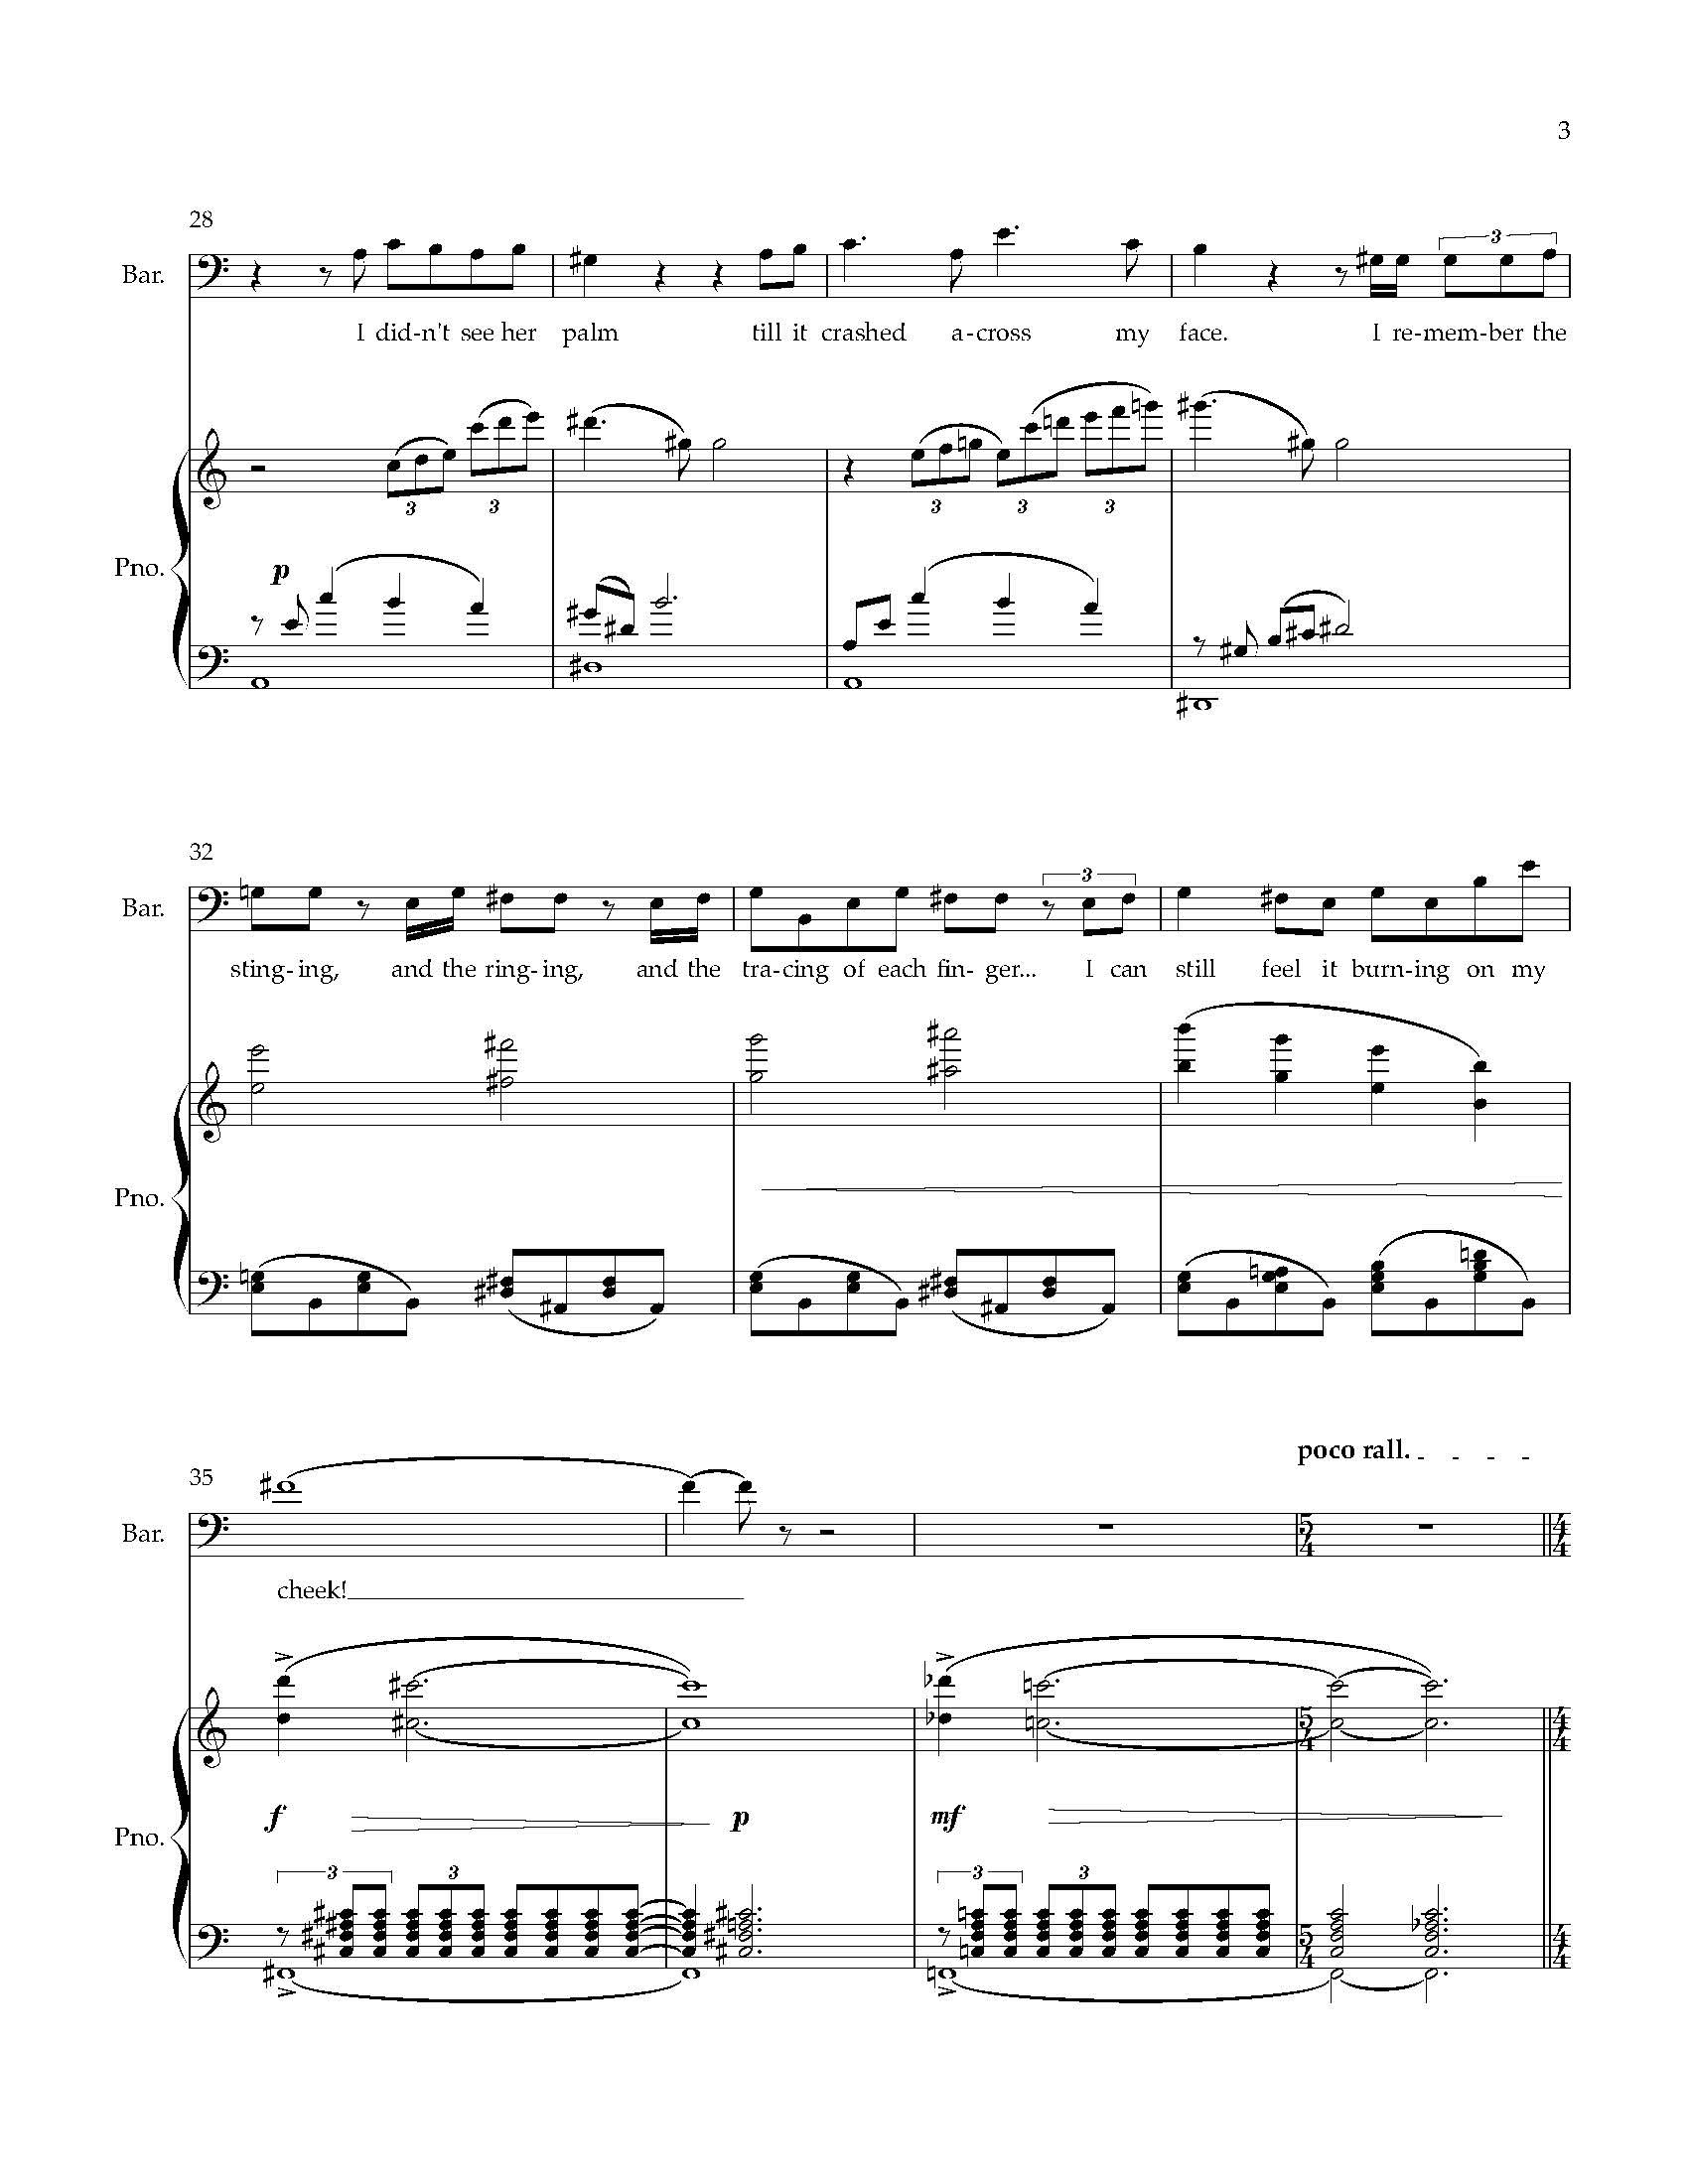 Five Arias from HWGS - Complete Score (1)_Page_07.jpg